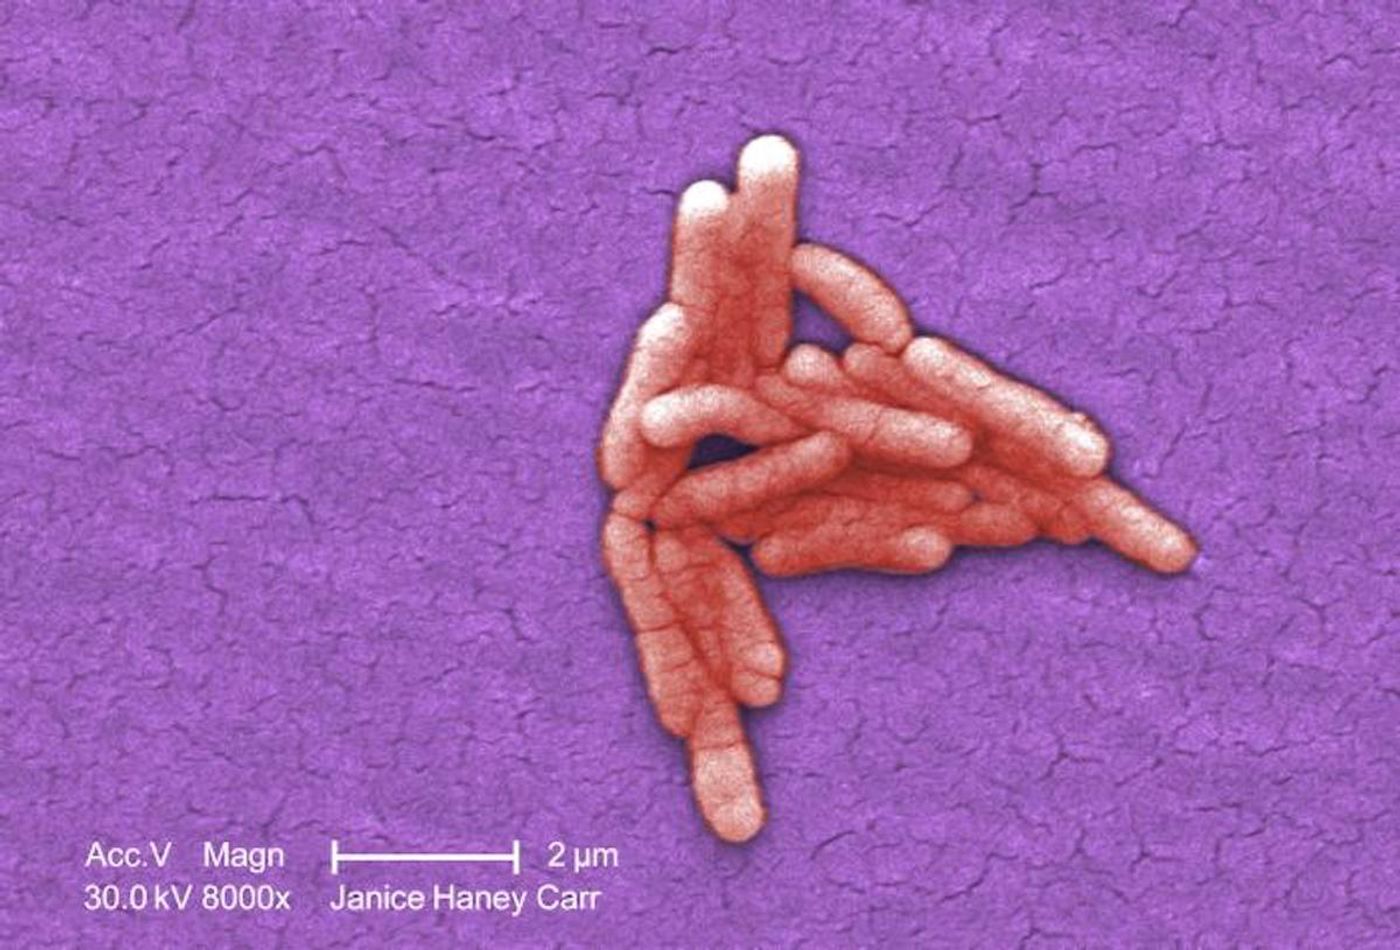 A digitally-colorized SEM image of Salmonella typhimurium bacteria isolated from a pure culture, magnified 8000X. / Credit: CDC/ Bette Jensen